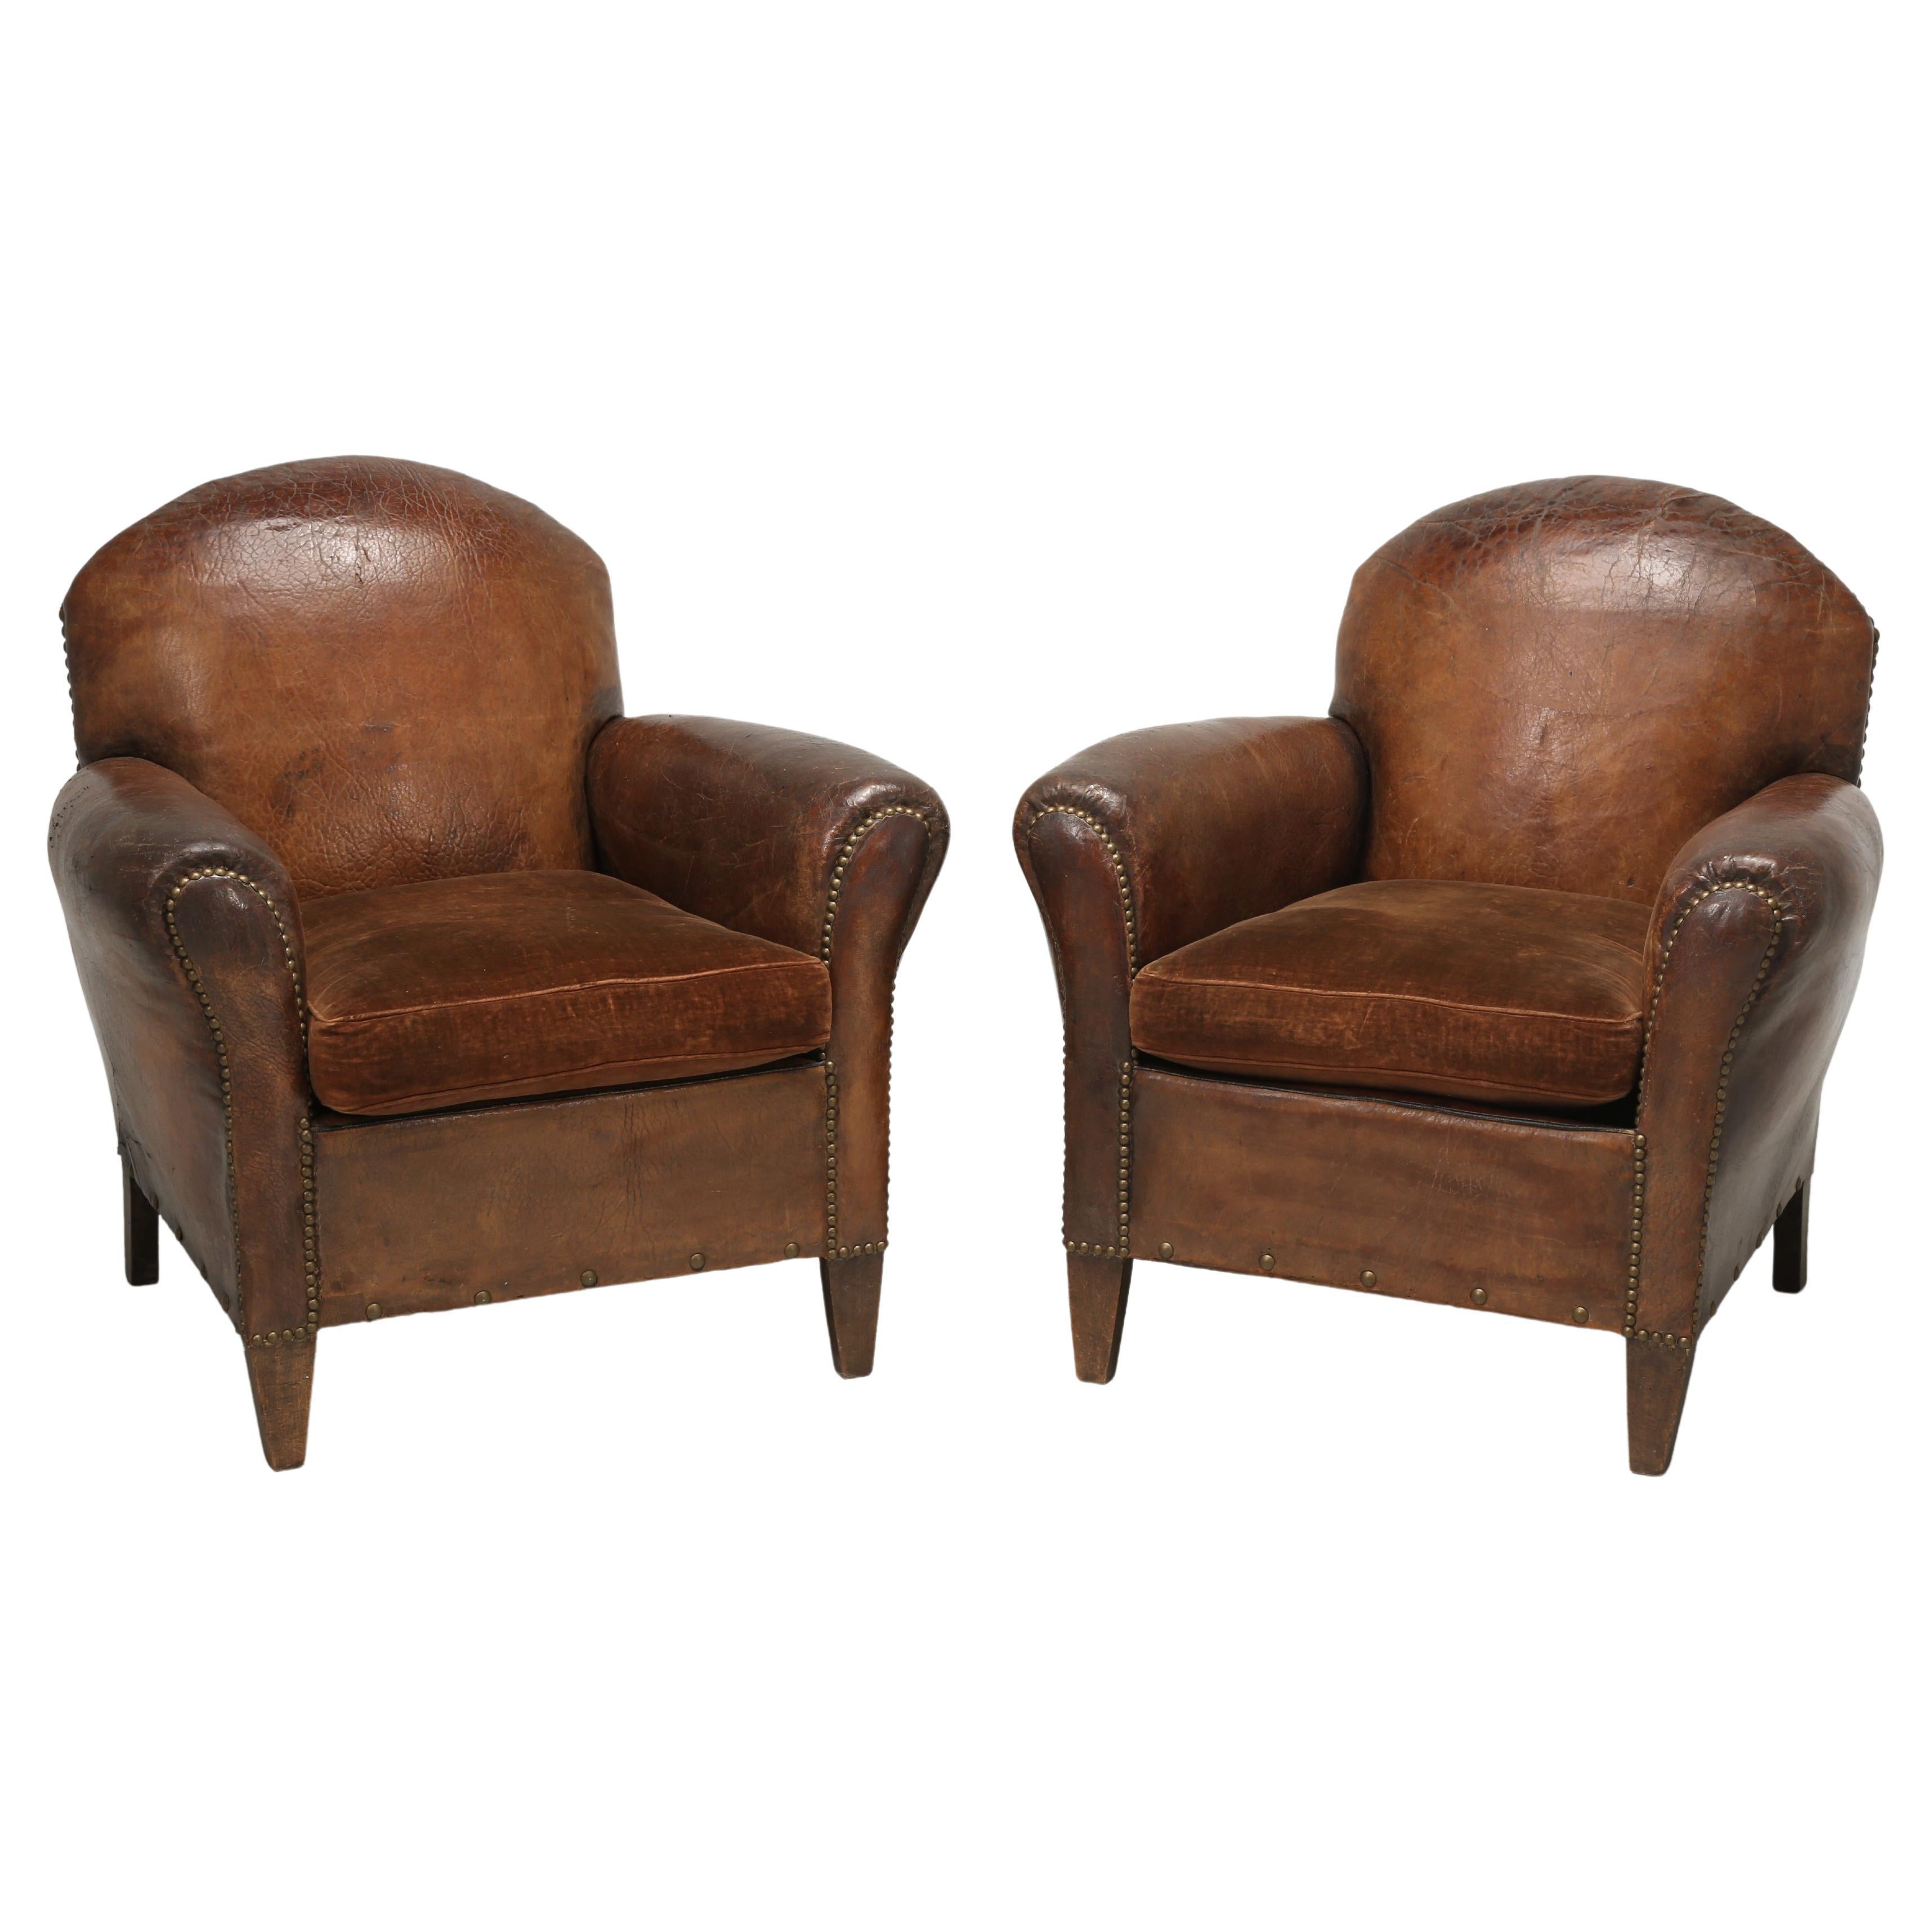 French Club Chairs in Original Leather and Restored Internally with Horsehair